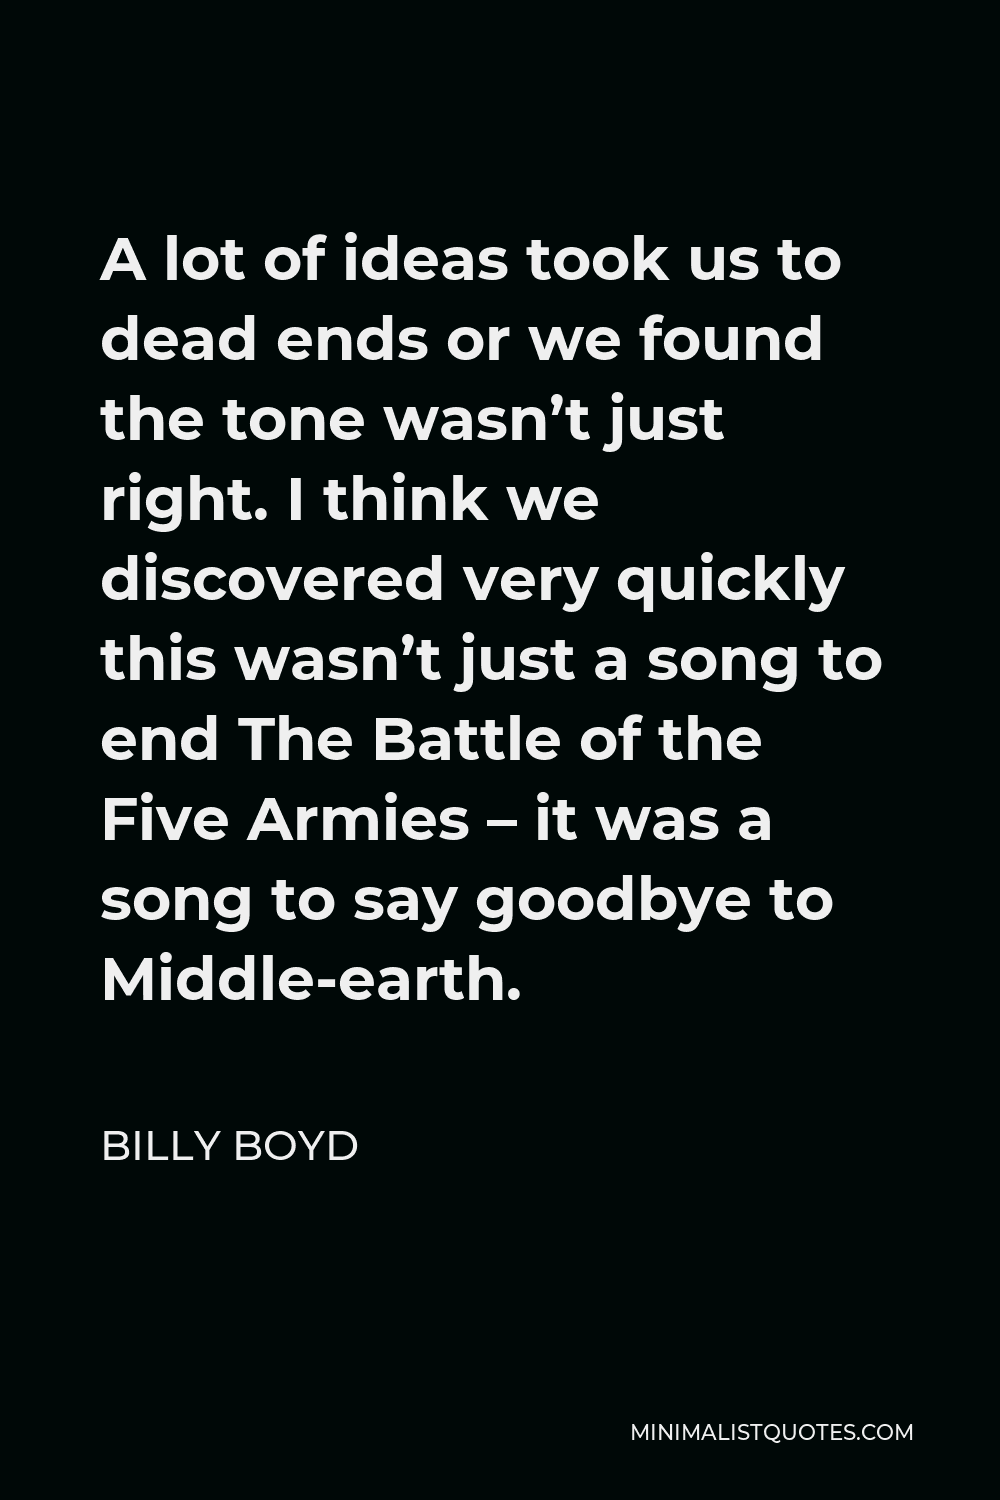 Billy Boyd Quote - A lot of ideas took us to dead ends or we found the tone wasn’t just right. I think we discovered very quickly this wasn’t just a song to end The Battle of the Five Armies – it was a song to say goodbye to Middle-earth.